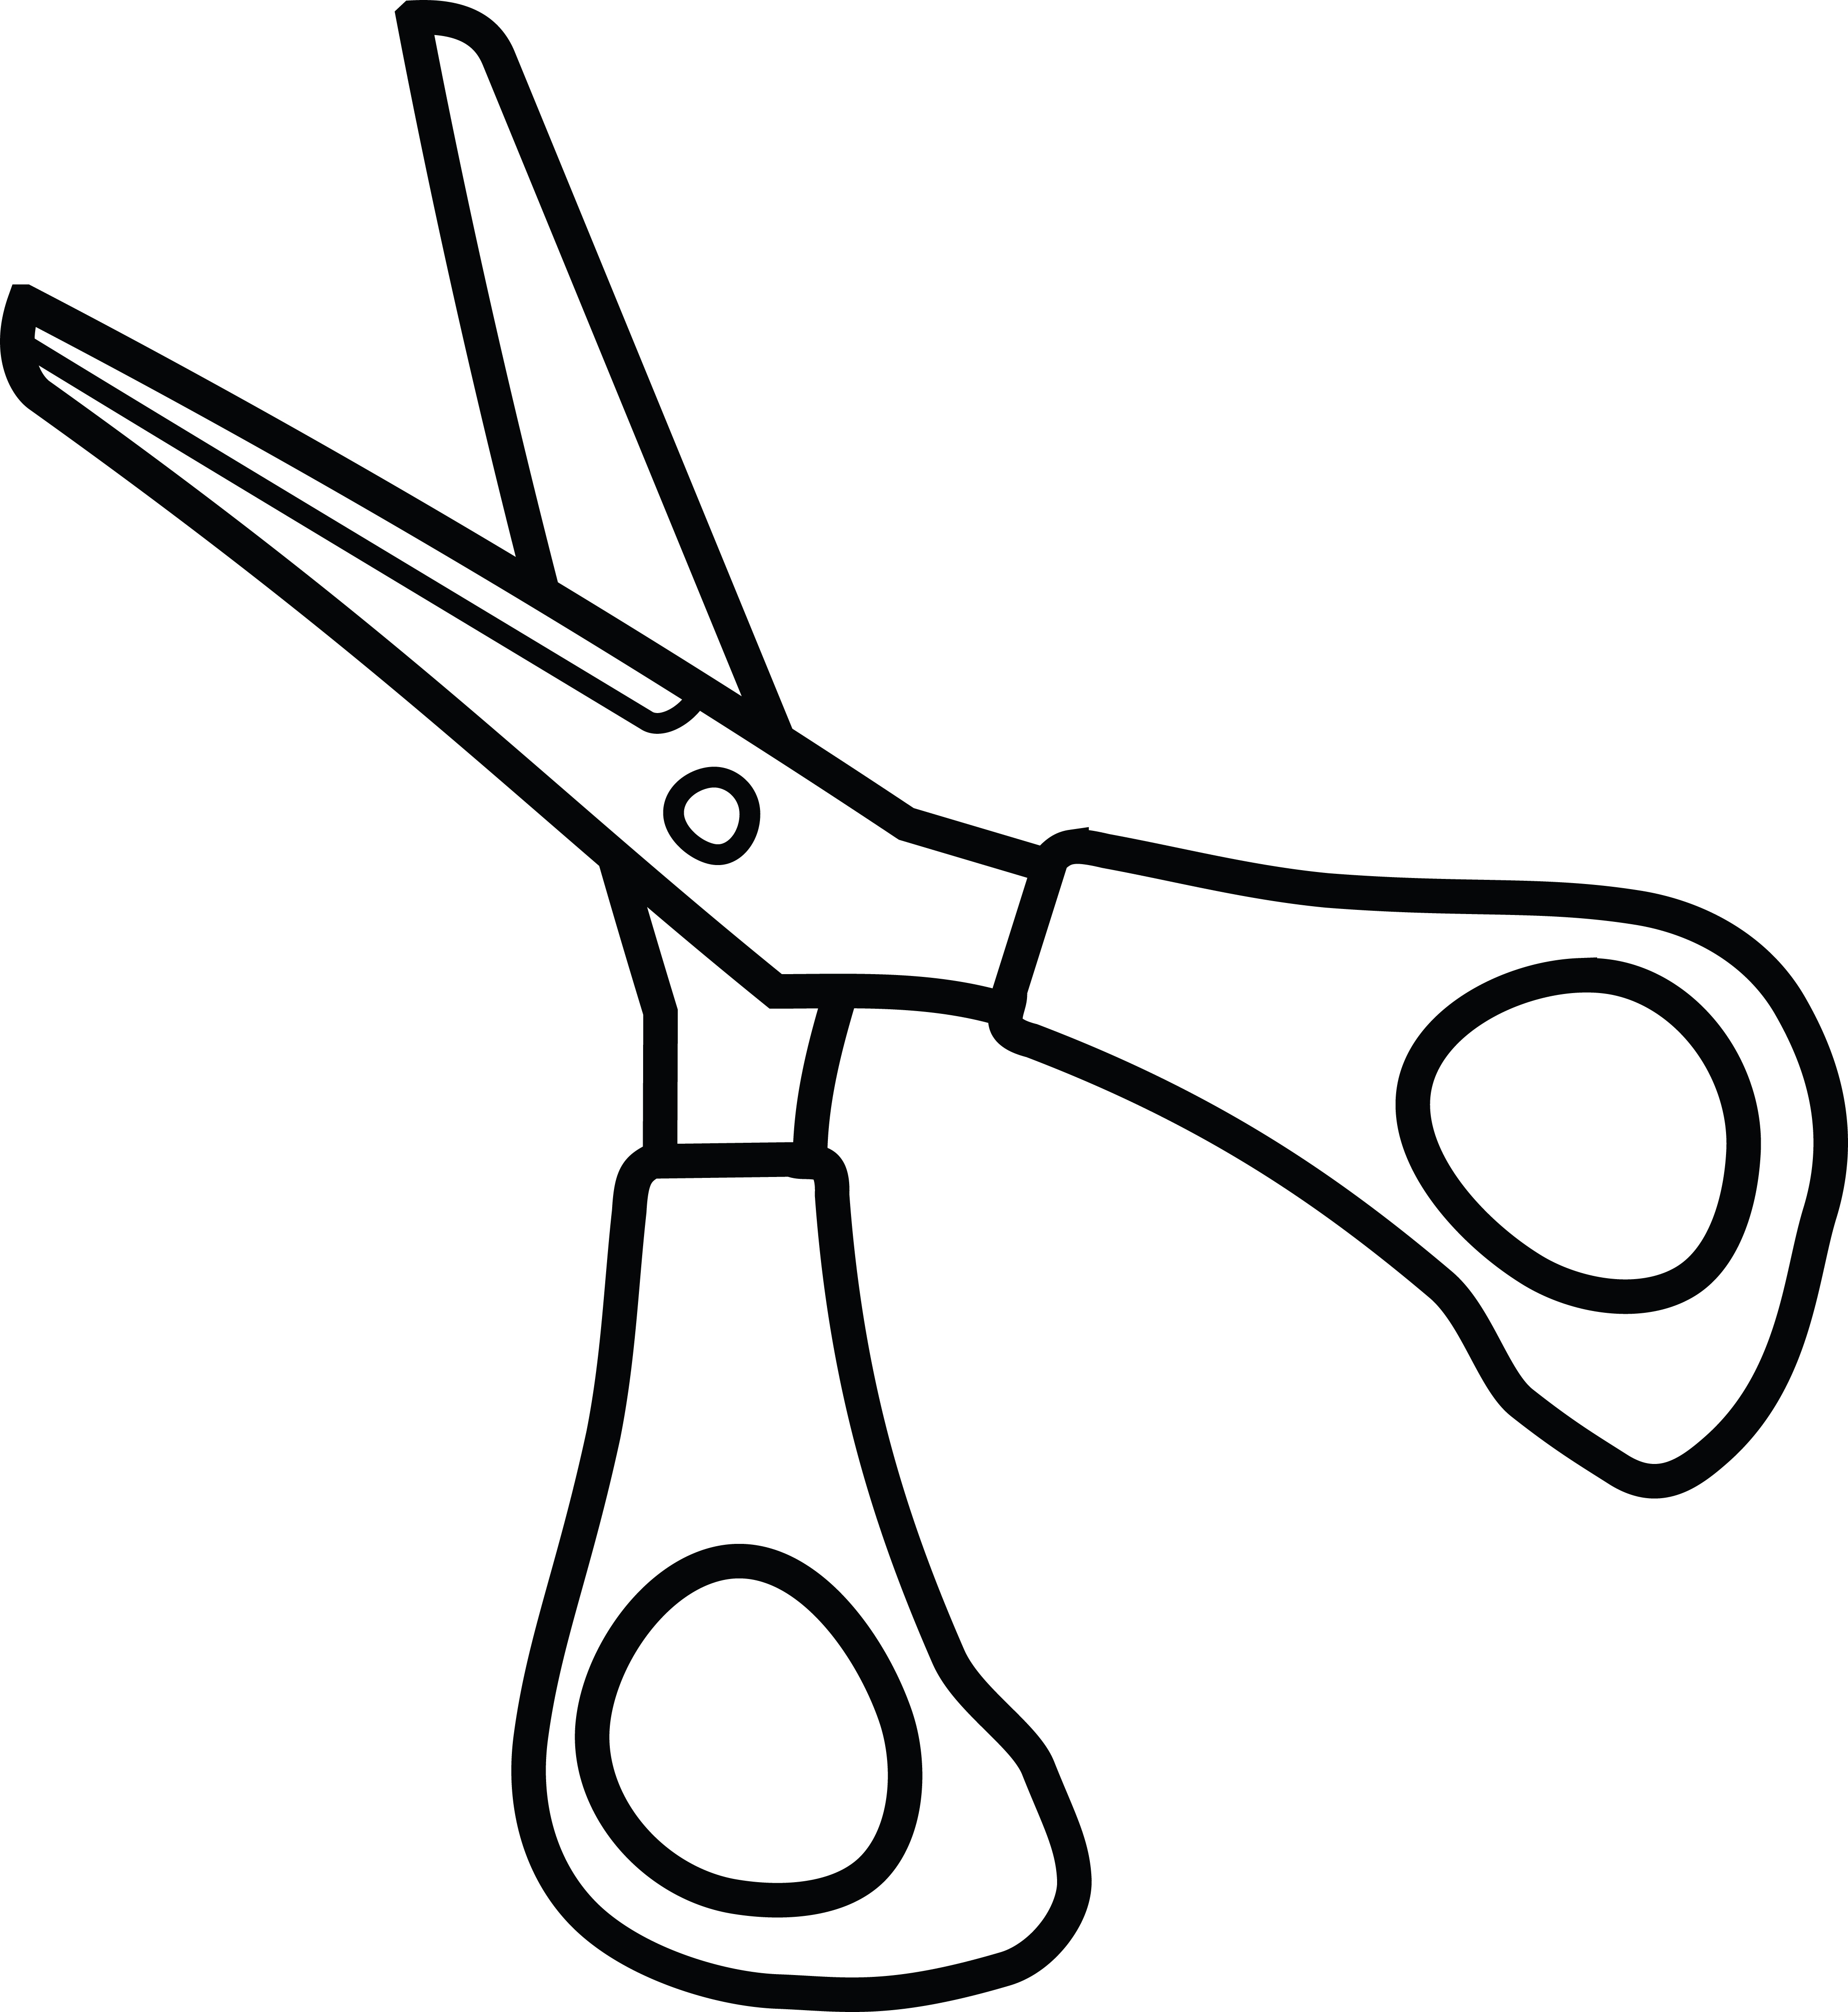 Free Clipart Of A Pair of scissors